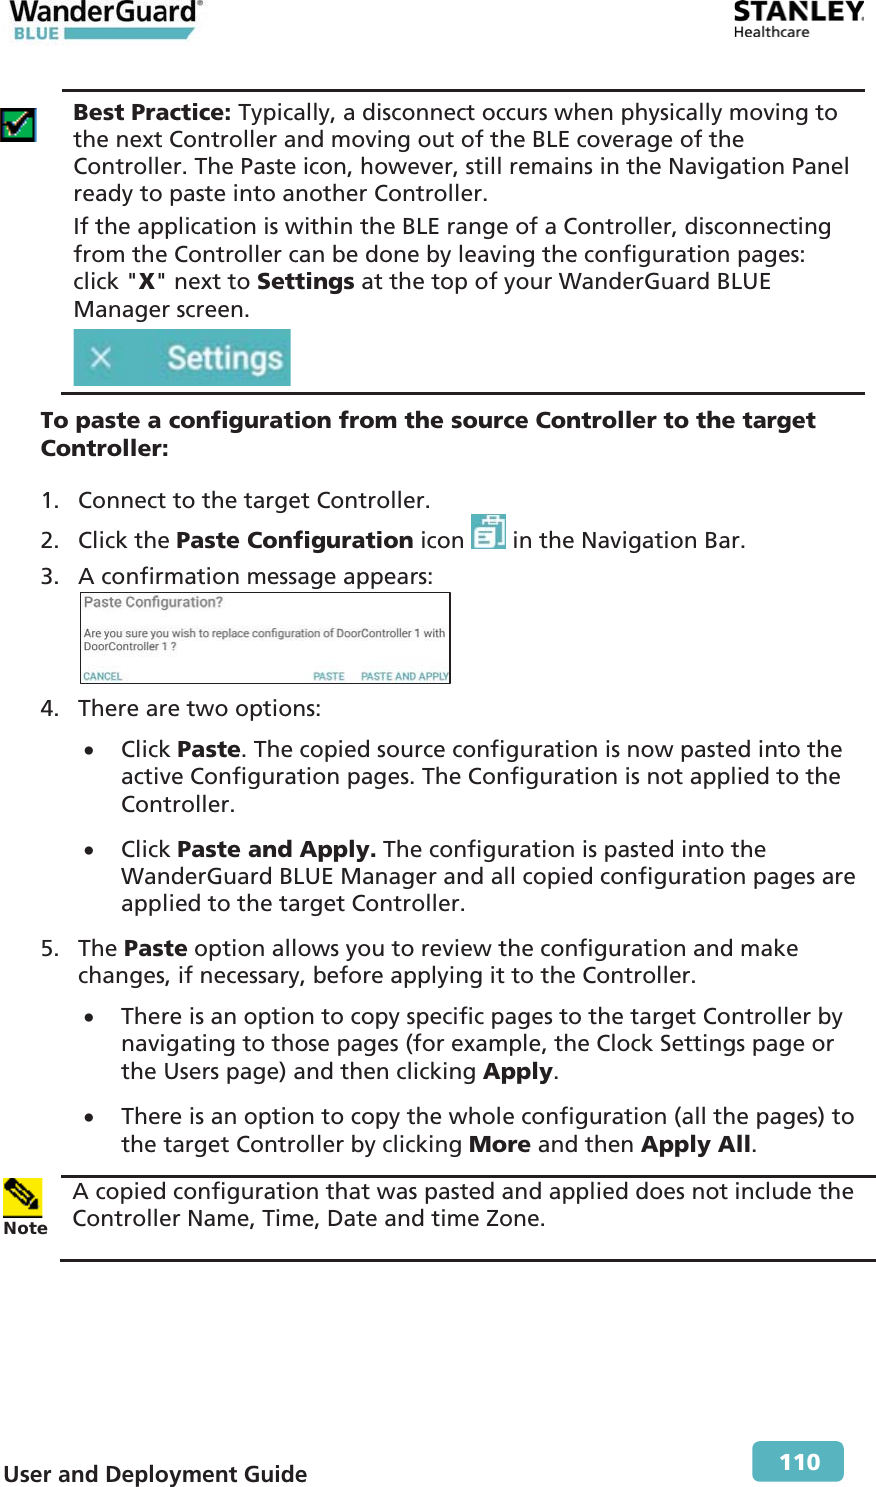  User and Deployment Guide        110  Best Practice: Typically, a disconnect occurs when physically moving to the next Controller and moving out of the BLE coverage of the Controller. The Paste icon, however, still remains in the Navigation Panel ready to paste into another Controller. If the application is within the BLE range of a Controller, disconnecting from the Controller can be done by leaving the configuration pages: click &quot;X&quot; next to Settings at the top of your WanderGuard BLUE Manager screen.  To paste a configuration from the source Controller to the target Controller: 1. Connect to the target Controller. 2. Click the Paste Configuration icon   in the Navigation Bar. 3. A confirmation message appears:  4. There are two options: x Click Paste. The copied source configuration is now pasted into the active Configuration pages. The Configuration is not applied to the Controller. x Click Paste and Apply. The configuration is pasted into the WanderGuard BLUE Manager and all copied configuration pages are applied to the target Controller. 5. The Paste option allows you to review the configuration and make changes, if necessary, before applying it to the Controller. x There is an option to copy specific pages to the target Controller by navigating to those pages (for example, the Clock Settings page or the Users page) and then clicking Apply. x There is an option to copy the whole configuration (all the pages) to the target Controller by clicking More and then Apply All.  Note A copied configuration that was pasted and applied does not include the Controller Name, Time, Date and time Zone.  